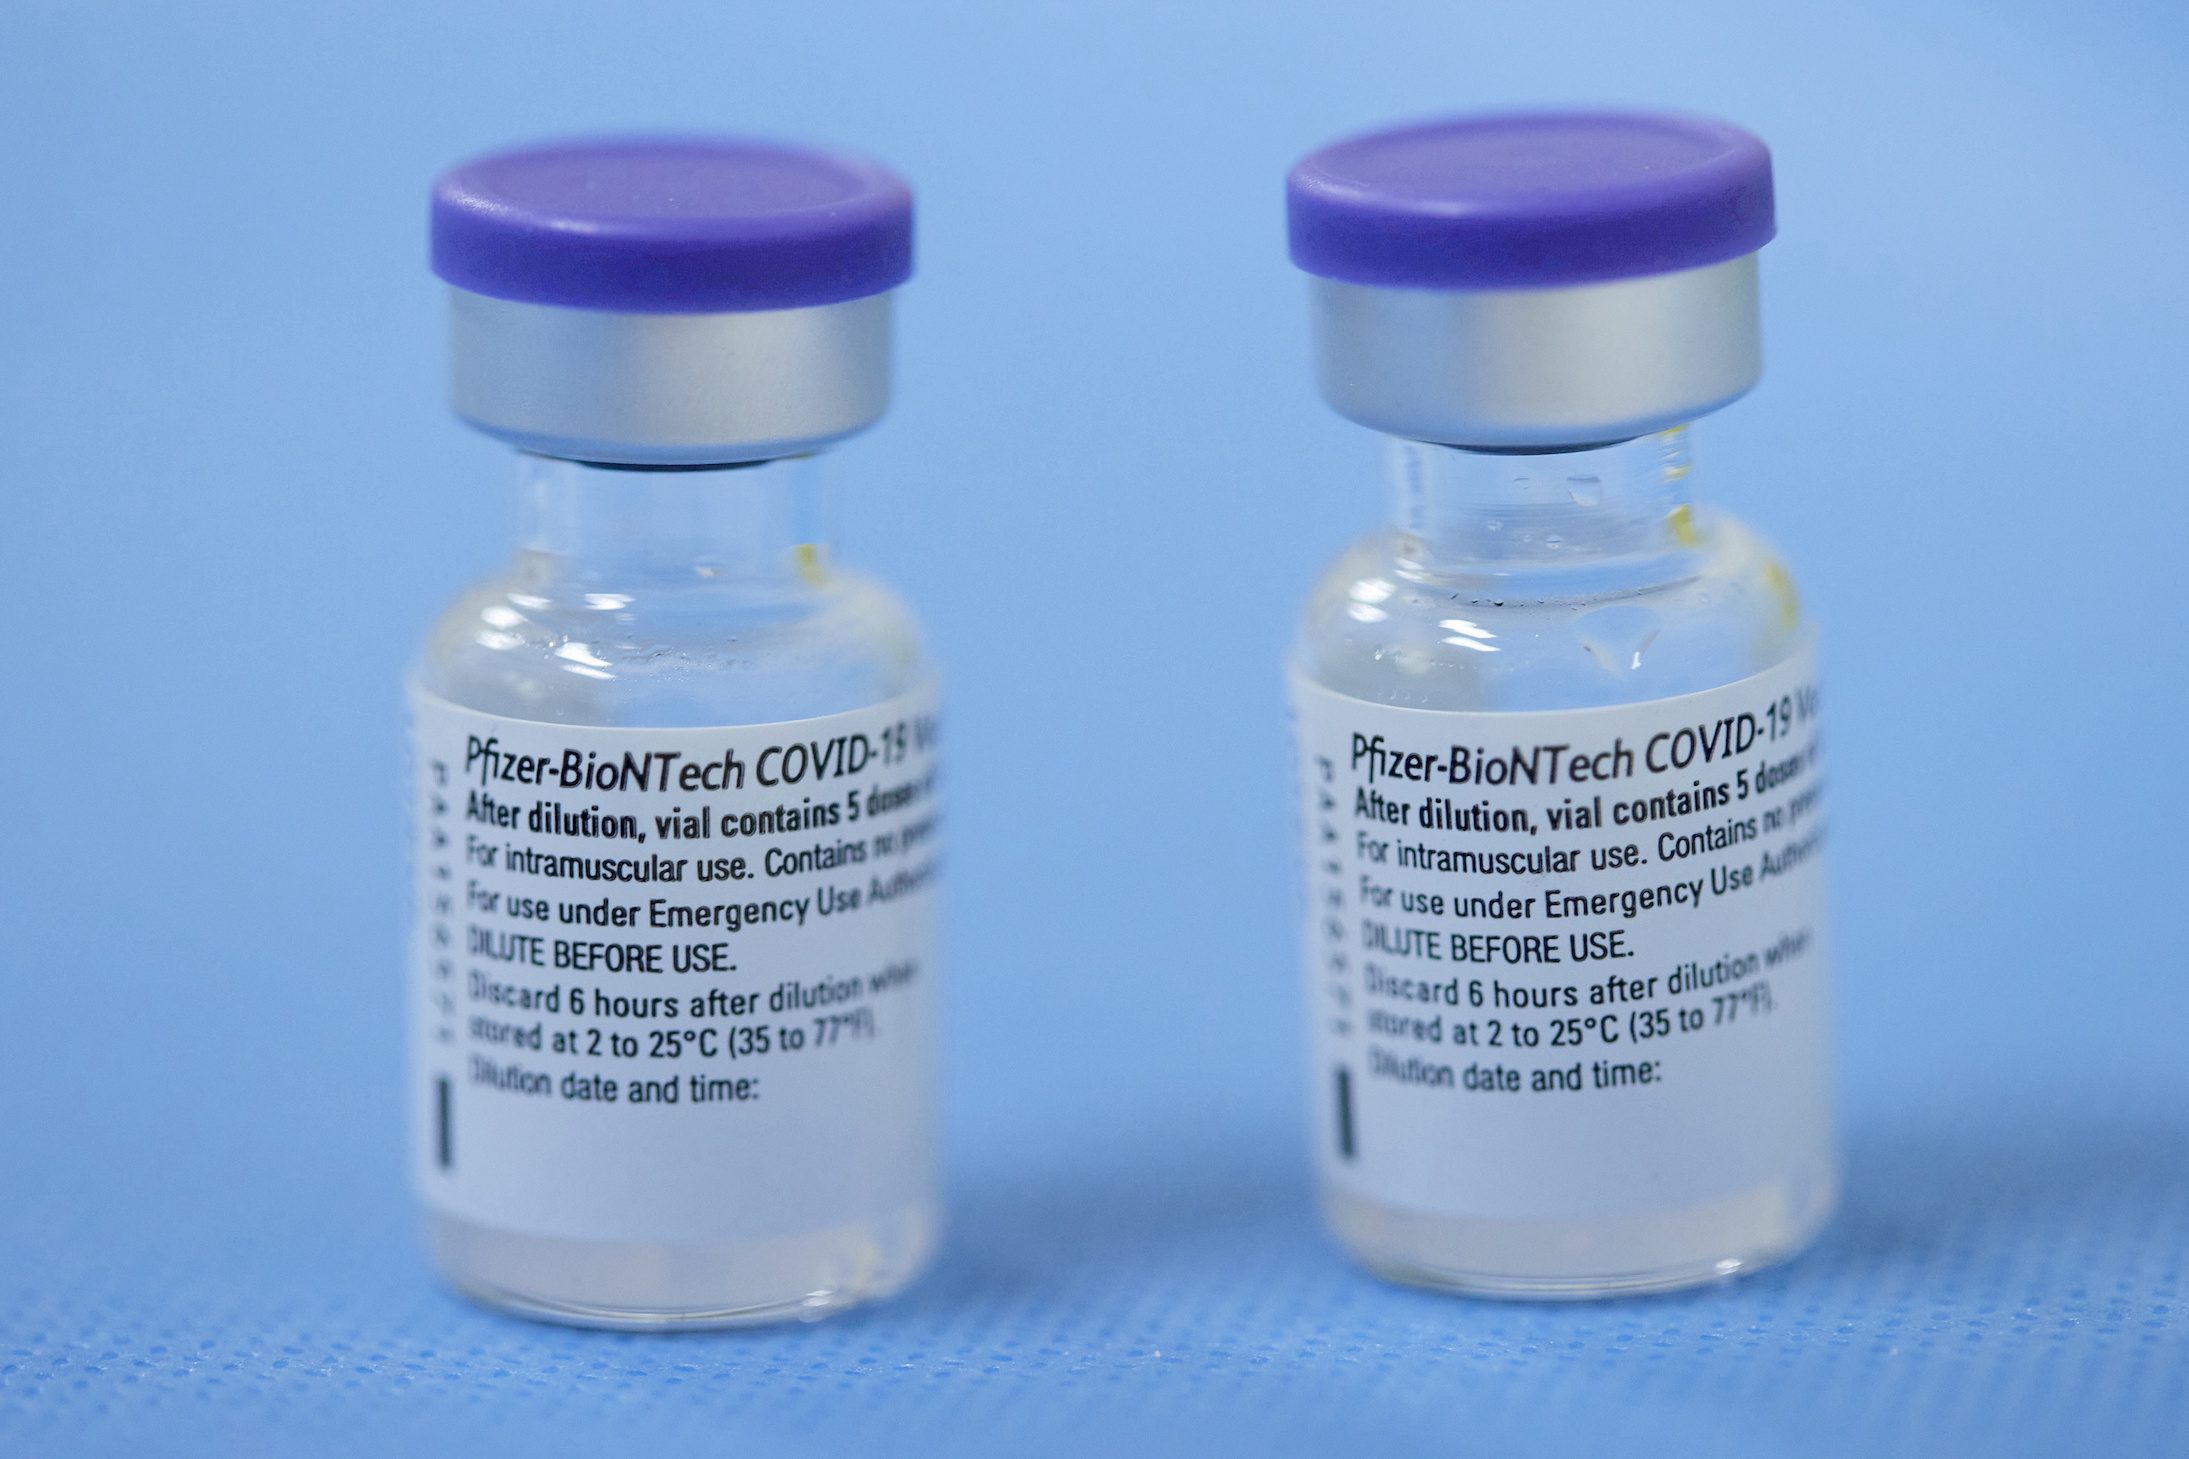 BioNTech to seek approval soon for vaccine for 5-11 year olds